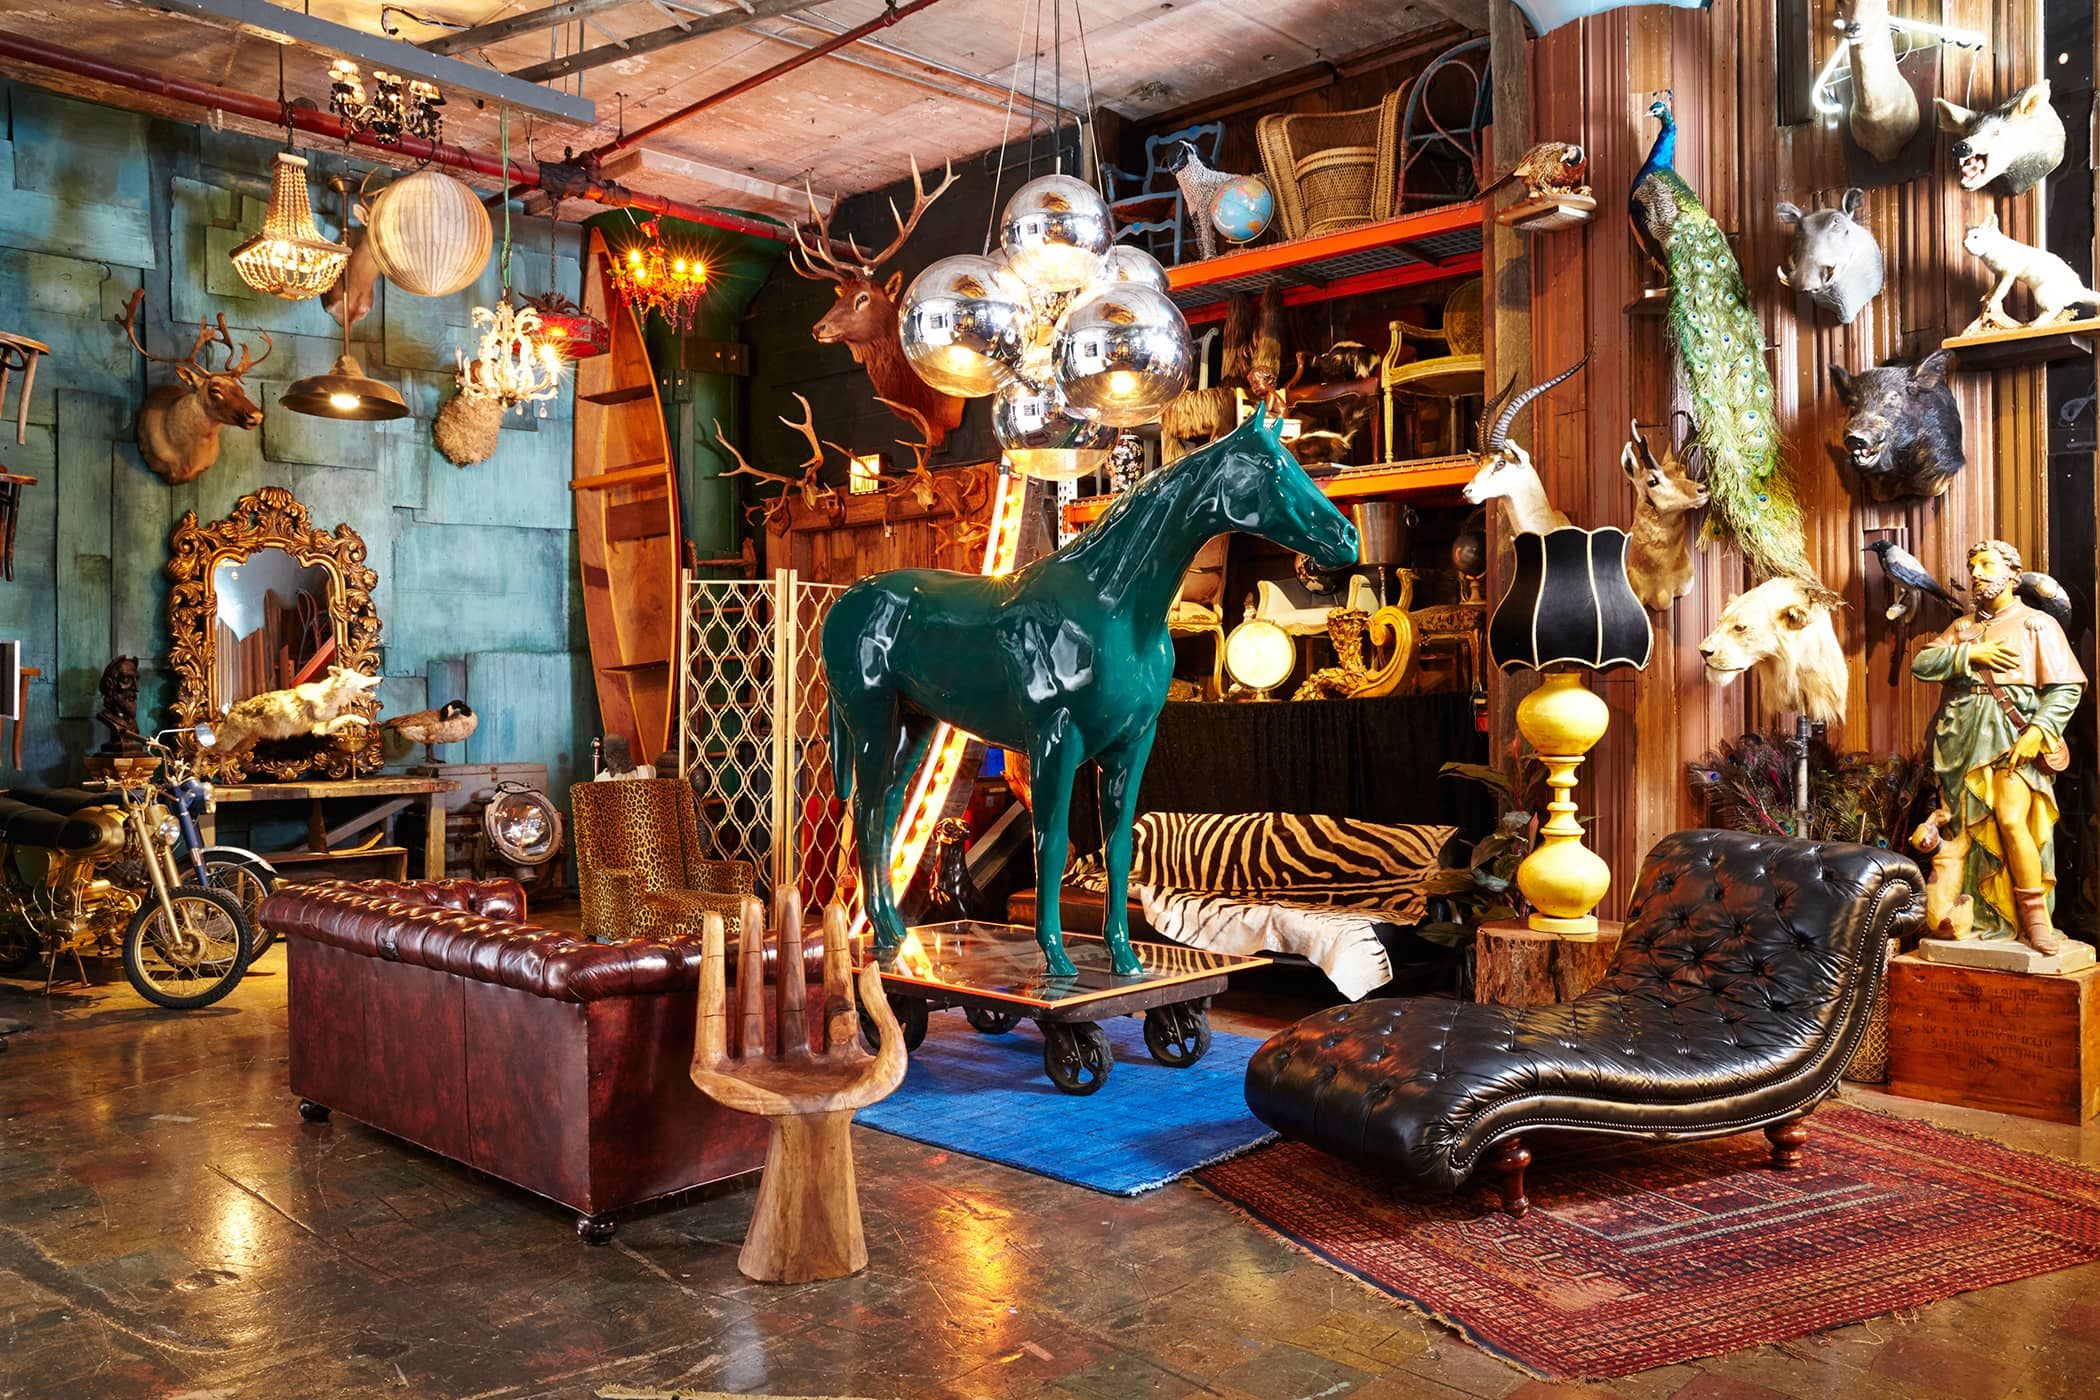 Hunting for Treasure in Brooklyn's Coolest Prop House - Atlas Obscura